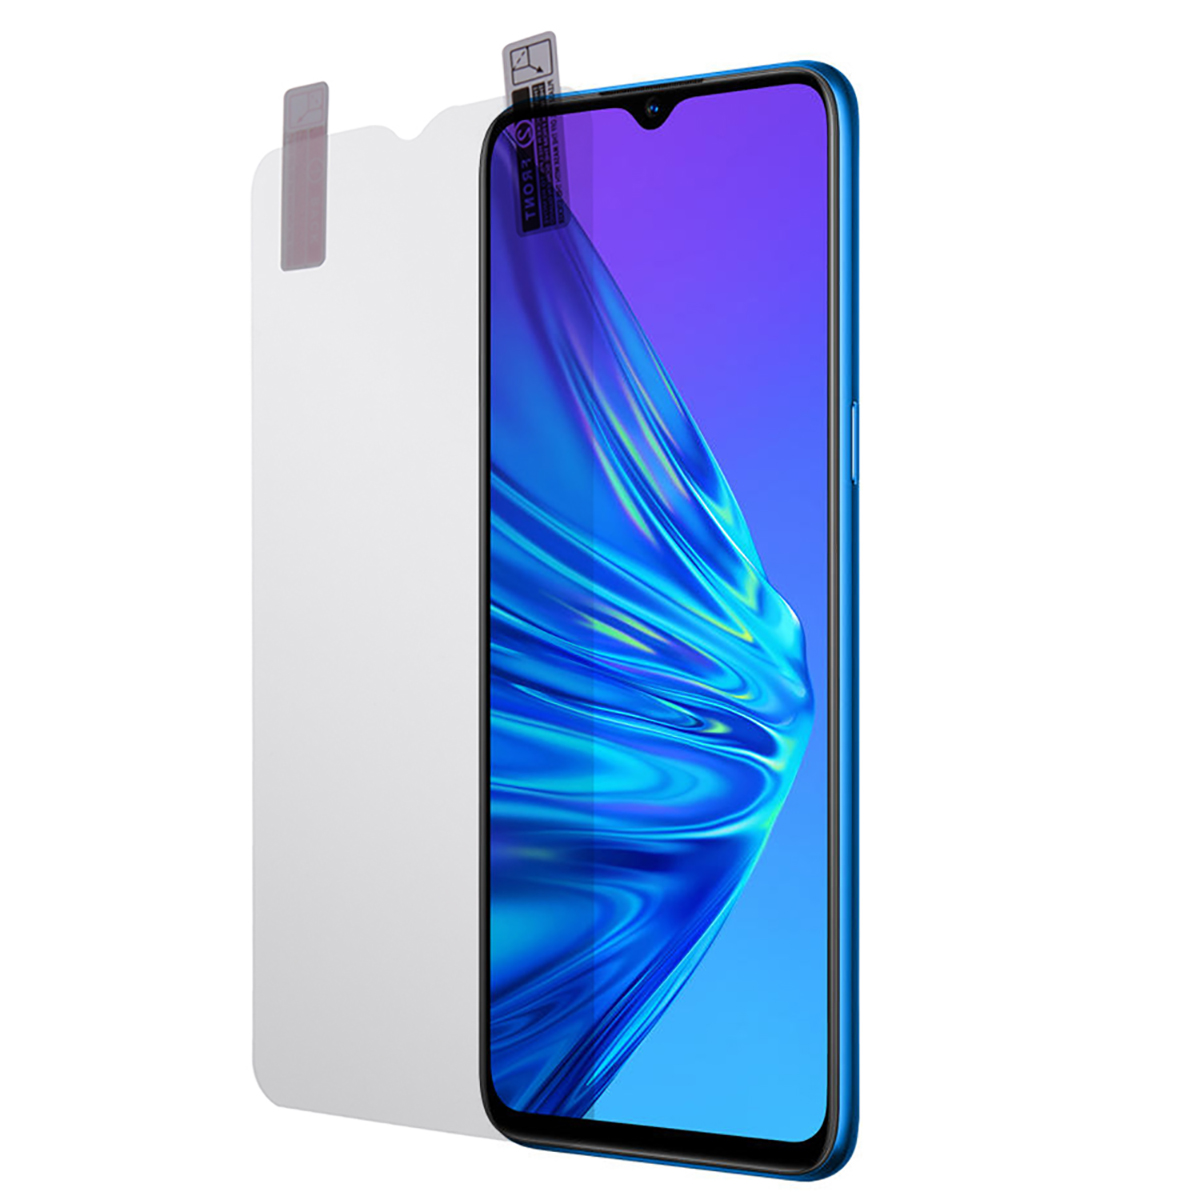 

Bakeey Crystal High Definition Ultra Thin Anti-Scratch Soft Screen Protector for OPPO Realme R5